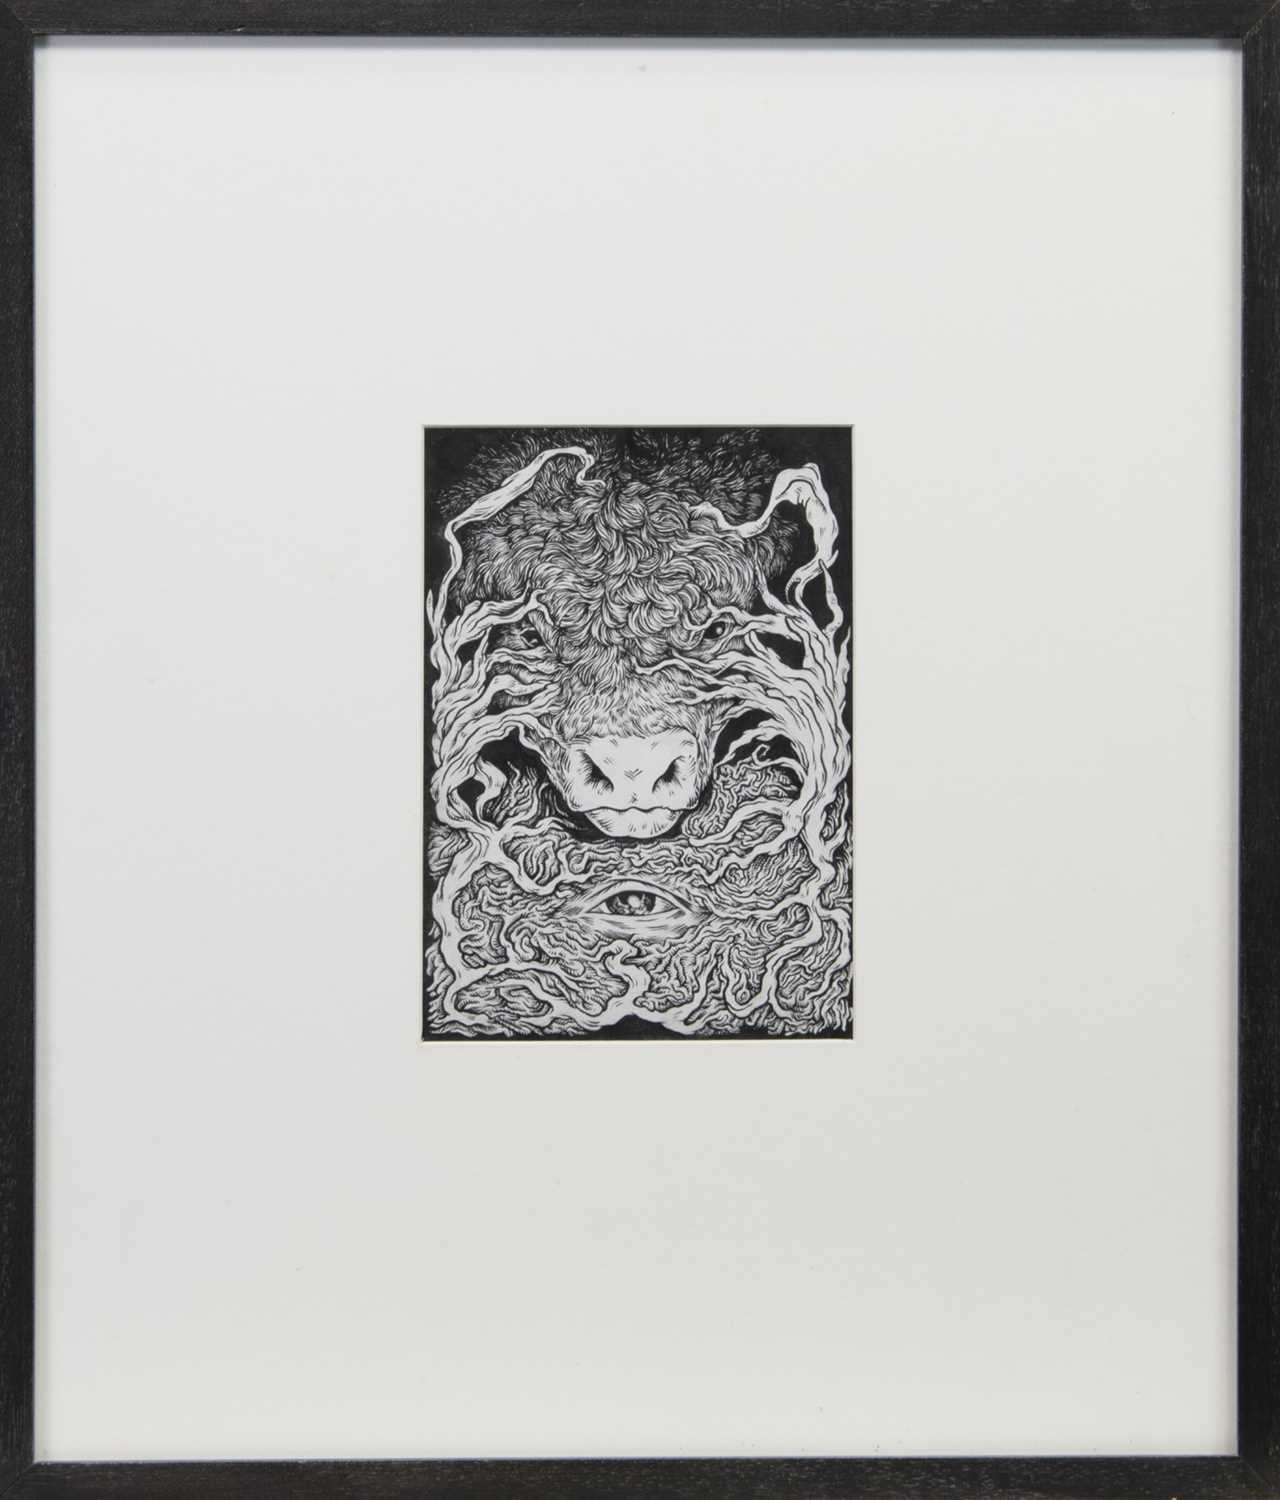 Lot 891 - THE EYE OF THE UNCONSCIOUS MIND, AN INK SKETCH BY BRODIE CHILDS